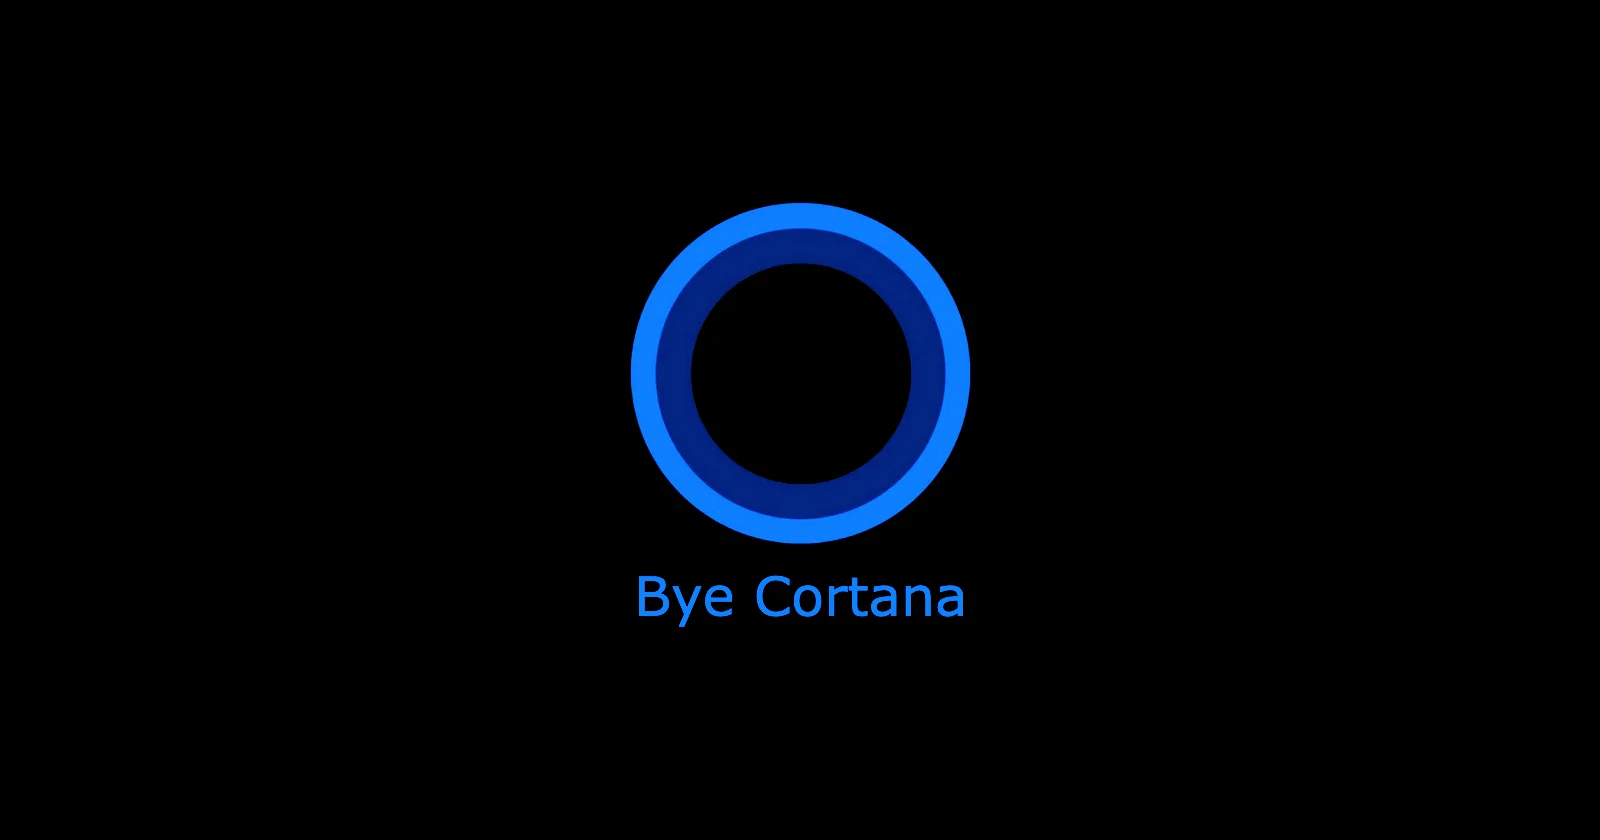 Cortana, goodbye! Microsoft to stop supporting voice assistant